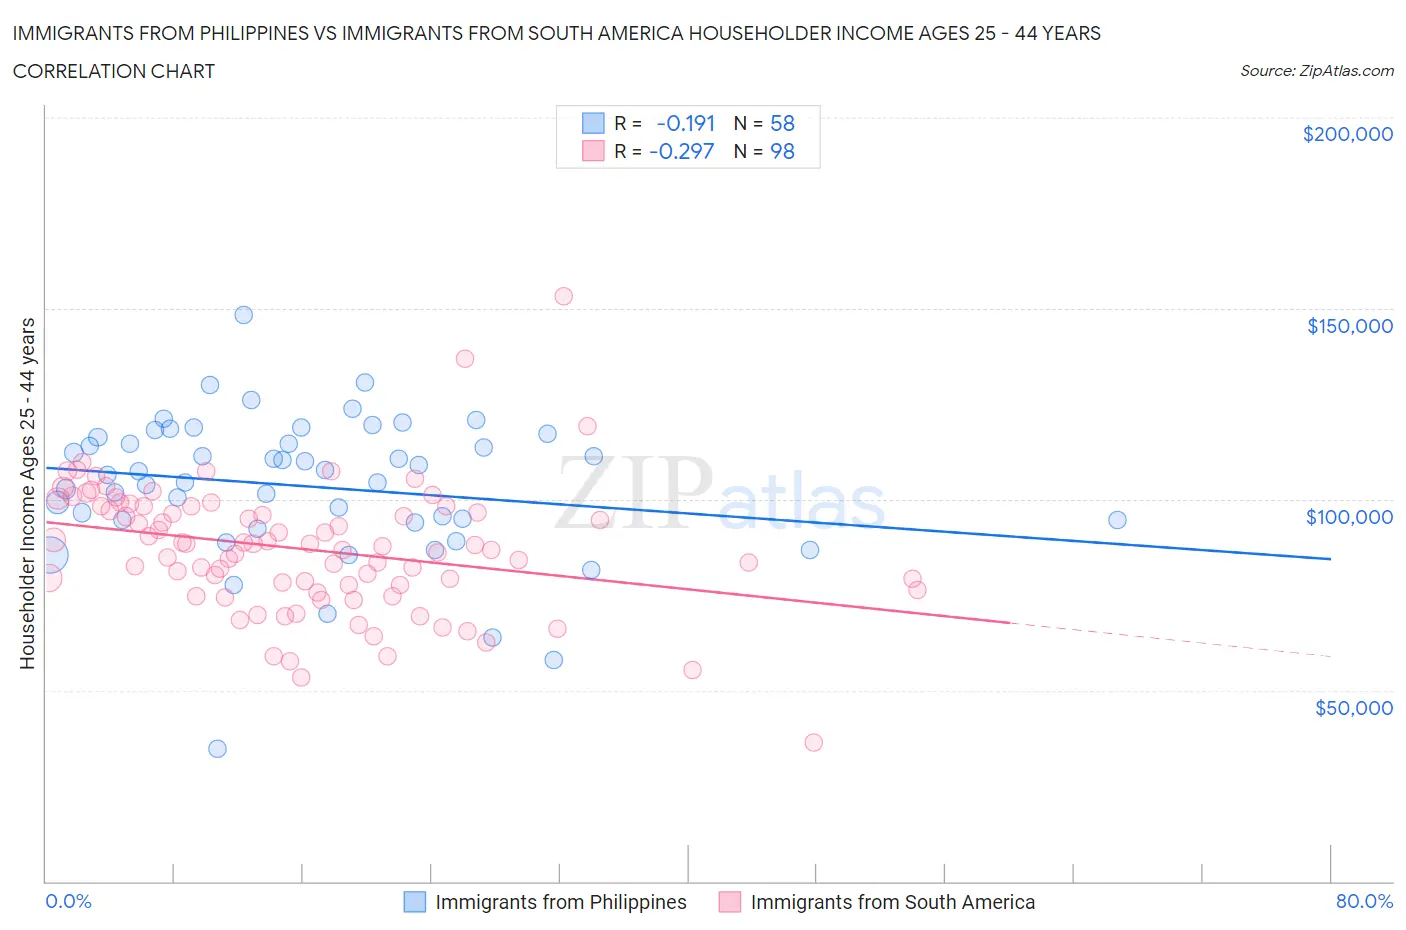 Immigrants from Philippines vs Immigrants from South America Householder Income Ages 25 - 44 years